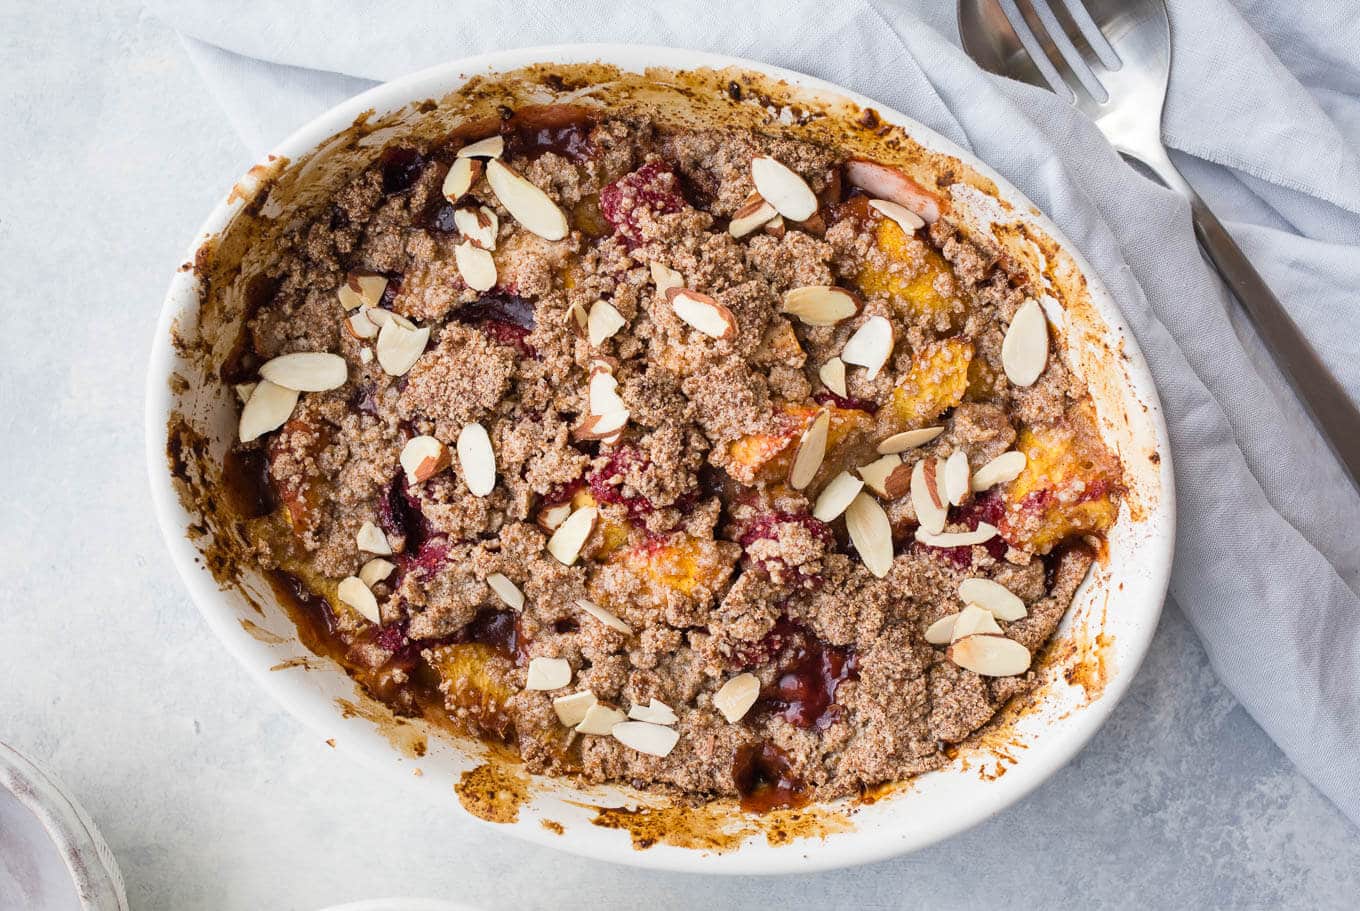 This Gluten-Free Raspberry Peach Crumble uses fresh raspberries and peaches, slivered almonds, almond flour, and unrefined coconut sugar and organic cane sugar. Simple to prepare and delicious with vanilla ice cream.